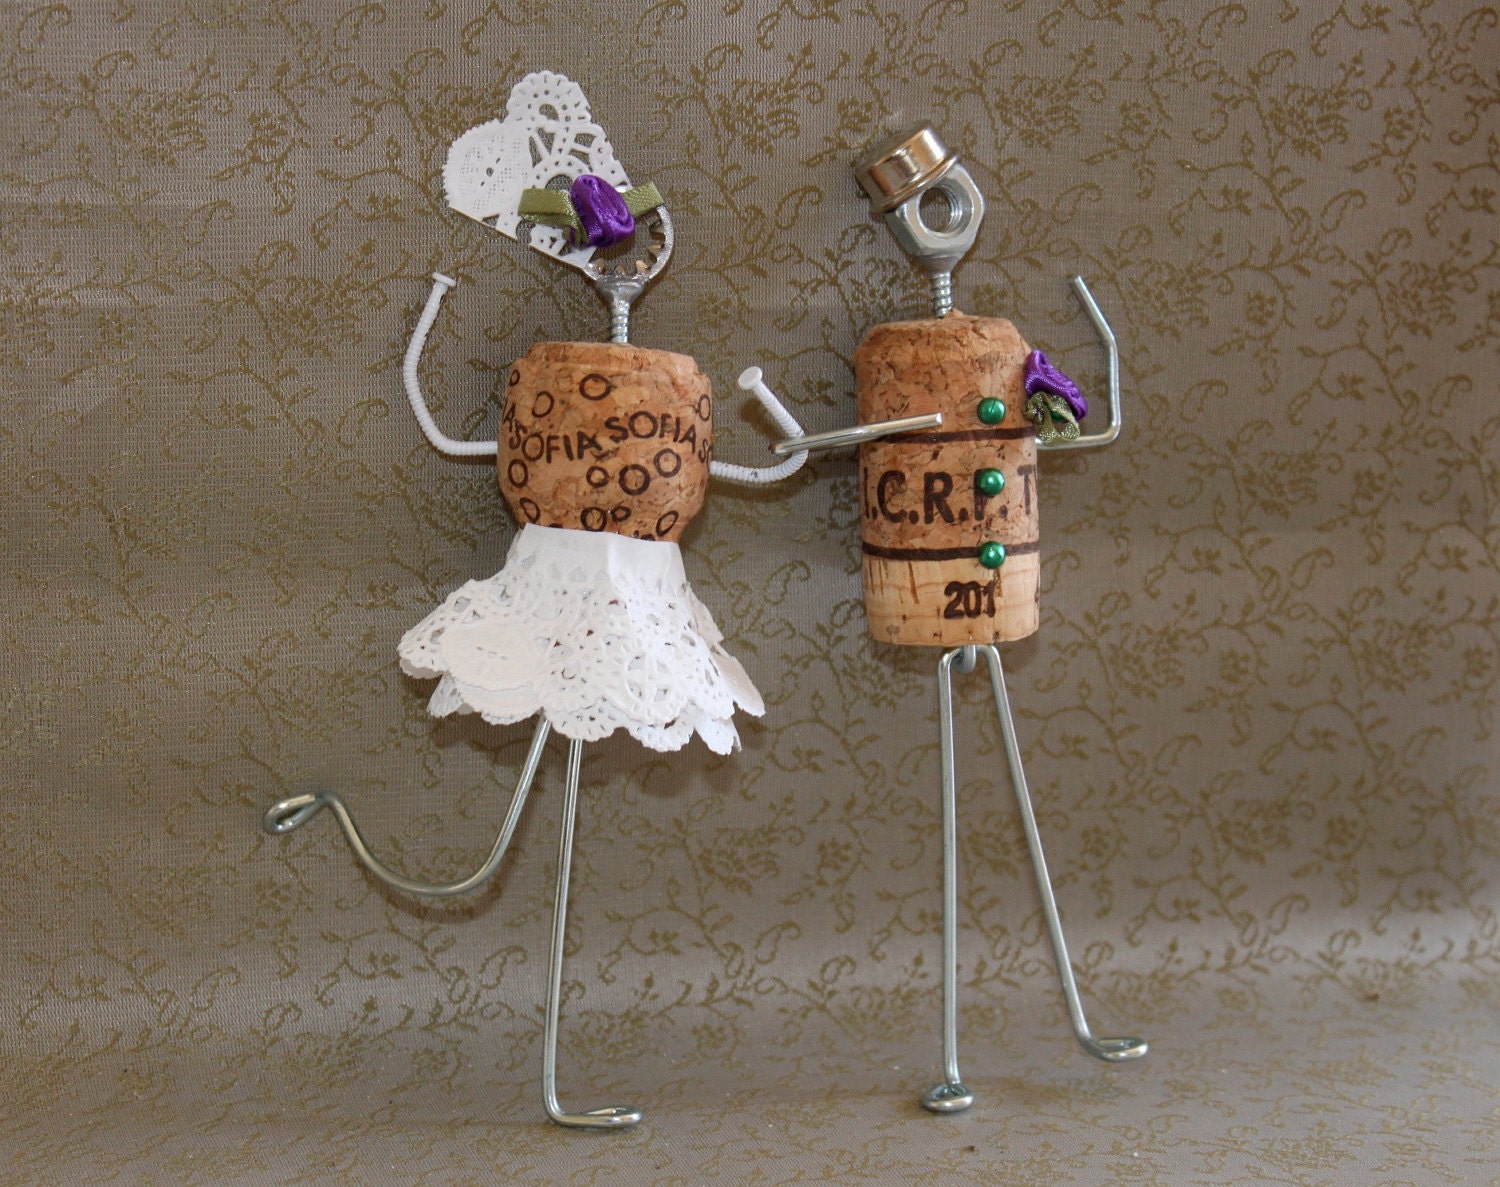 Whimsical Cork Wedding Cake Topper with Dress Bowler Hat and Boutonniere